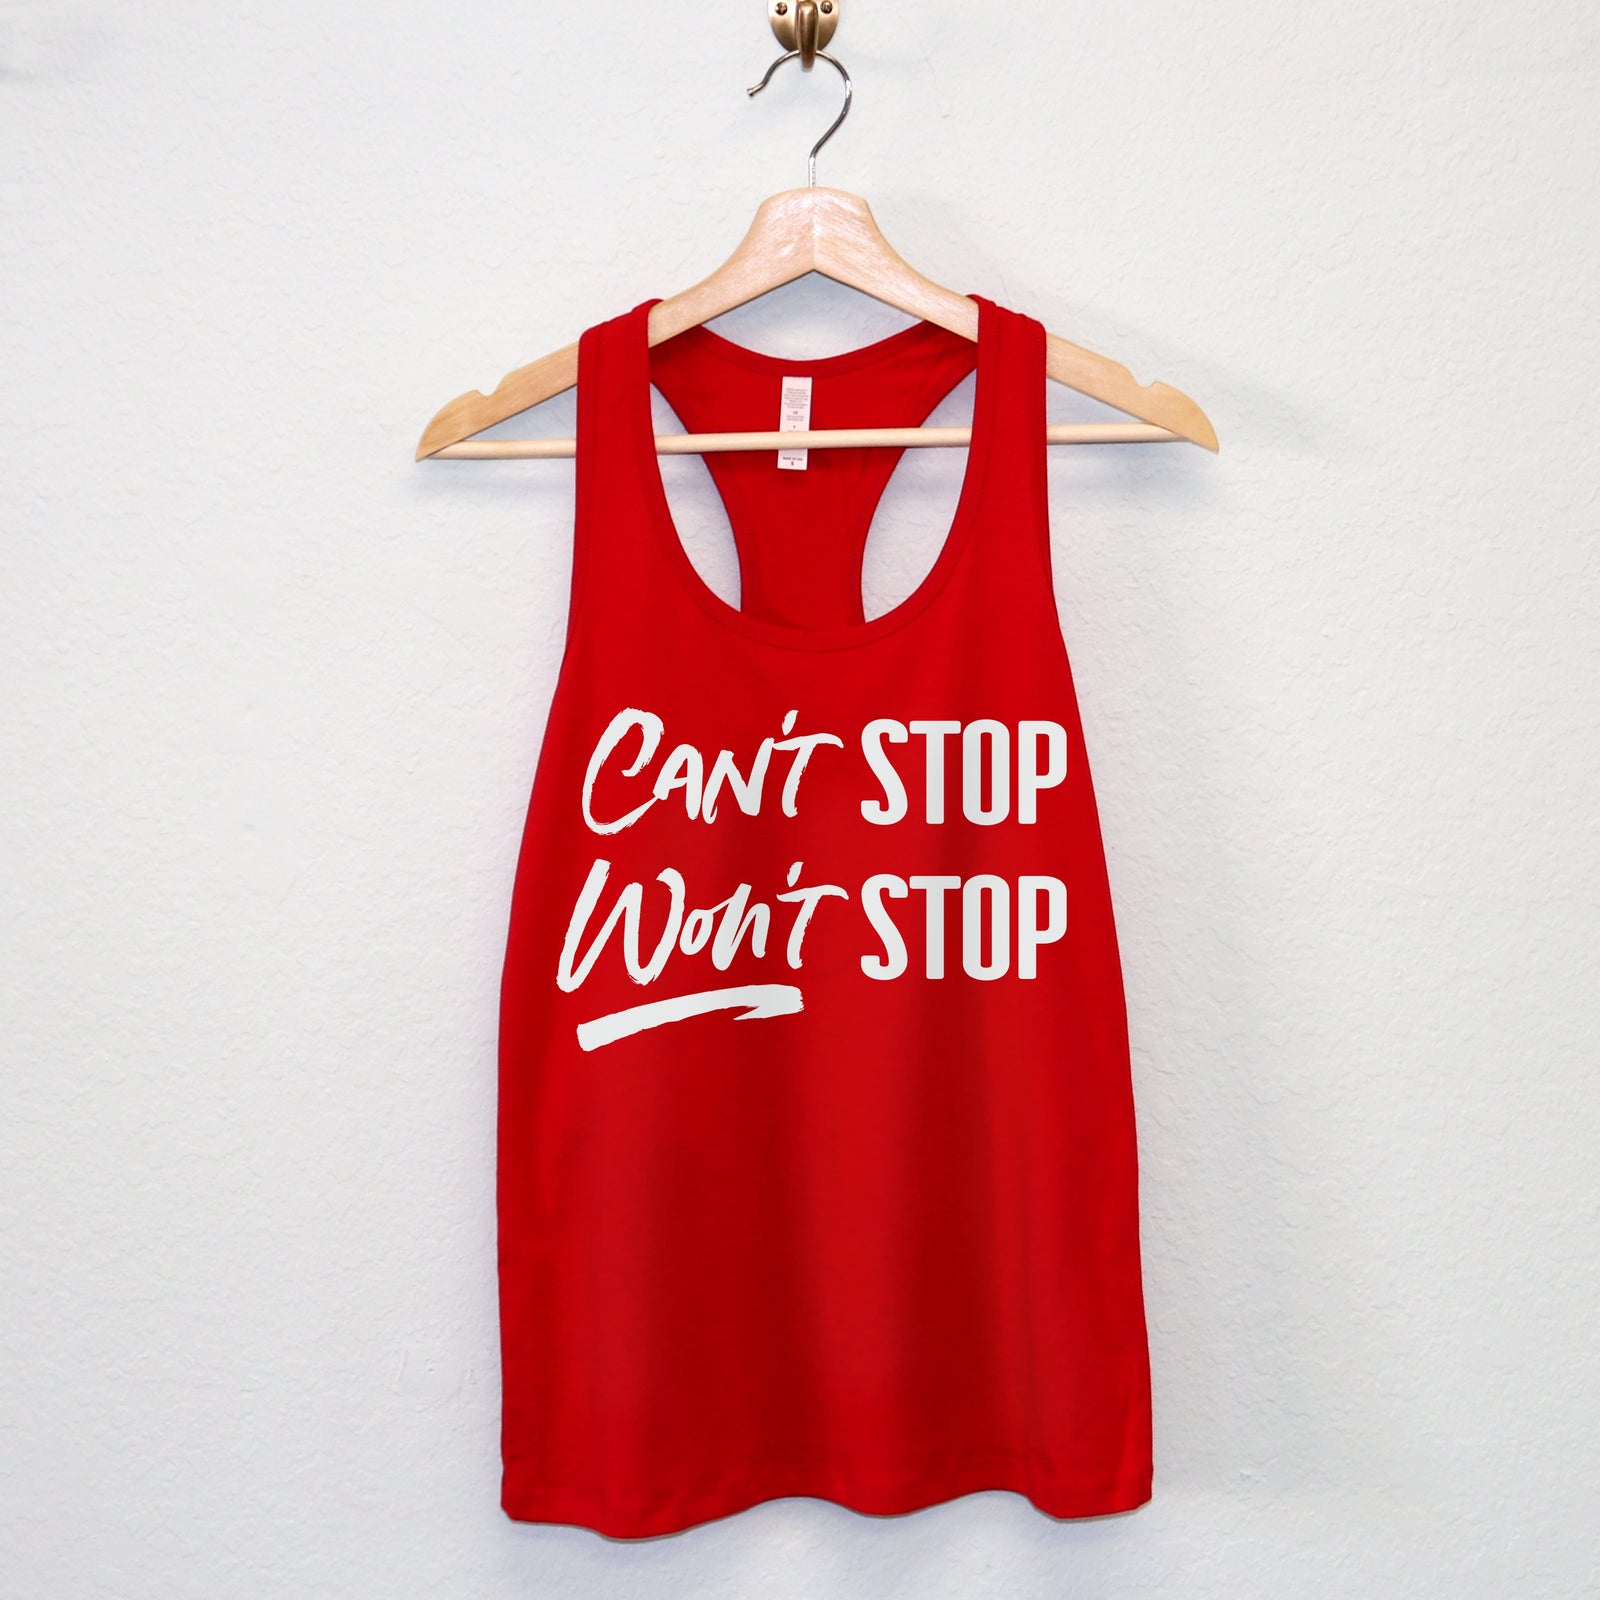 Can't Stop Won't Stop Racerback Tank Top - All Good Laces